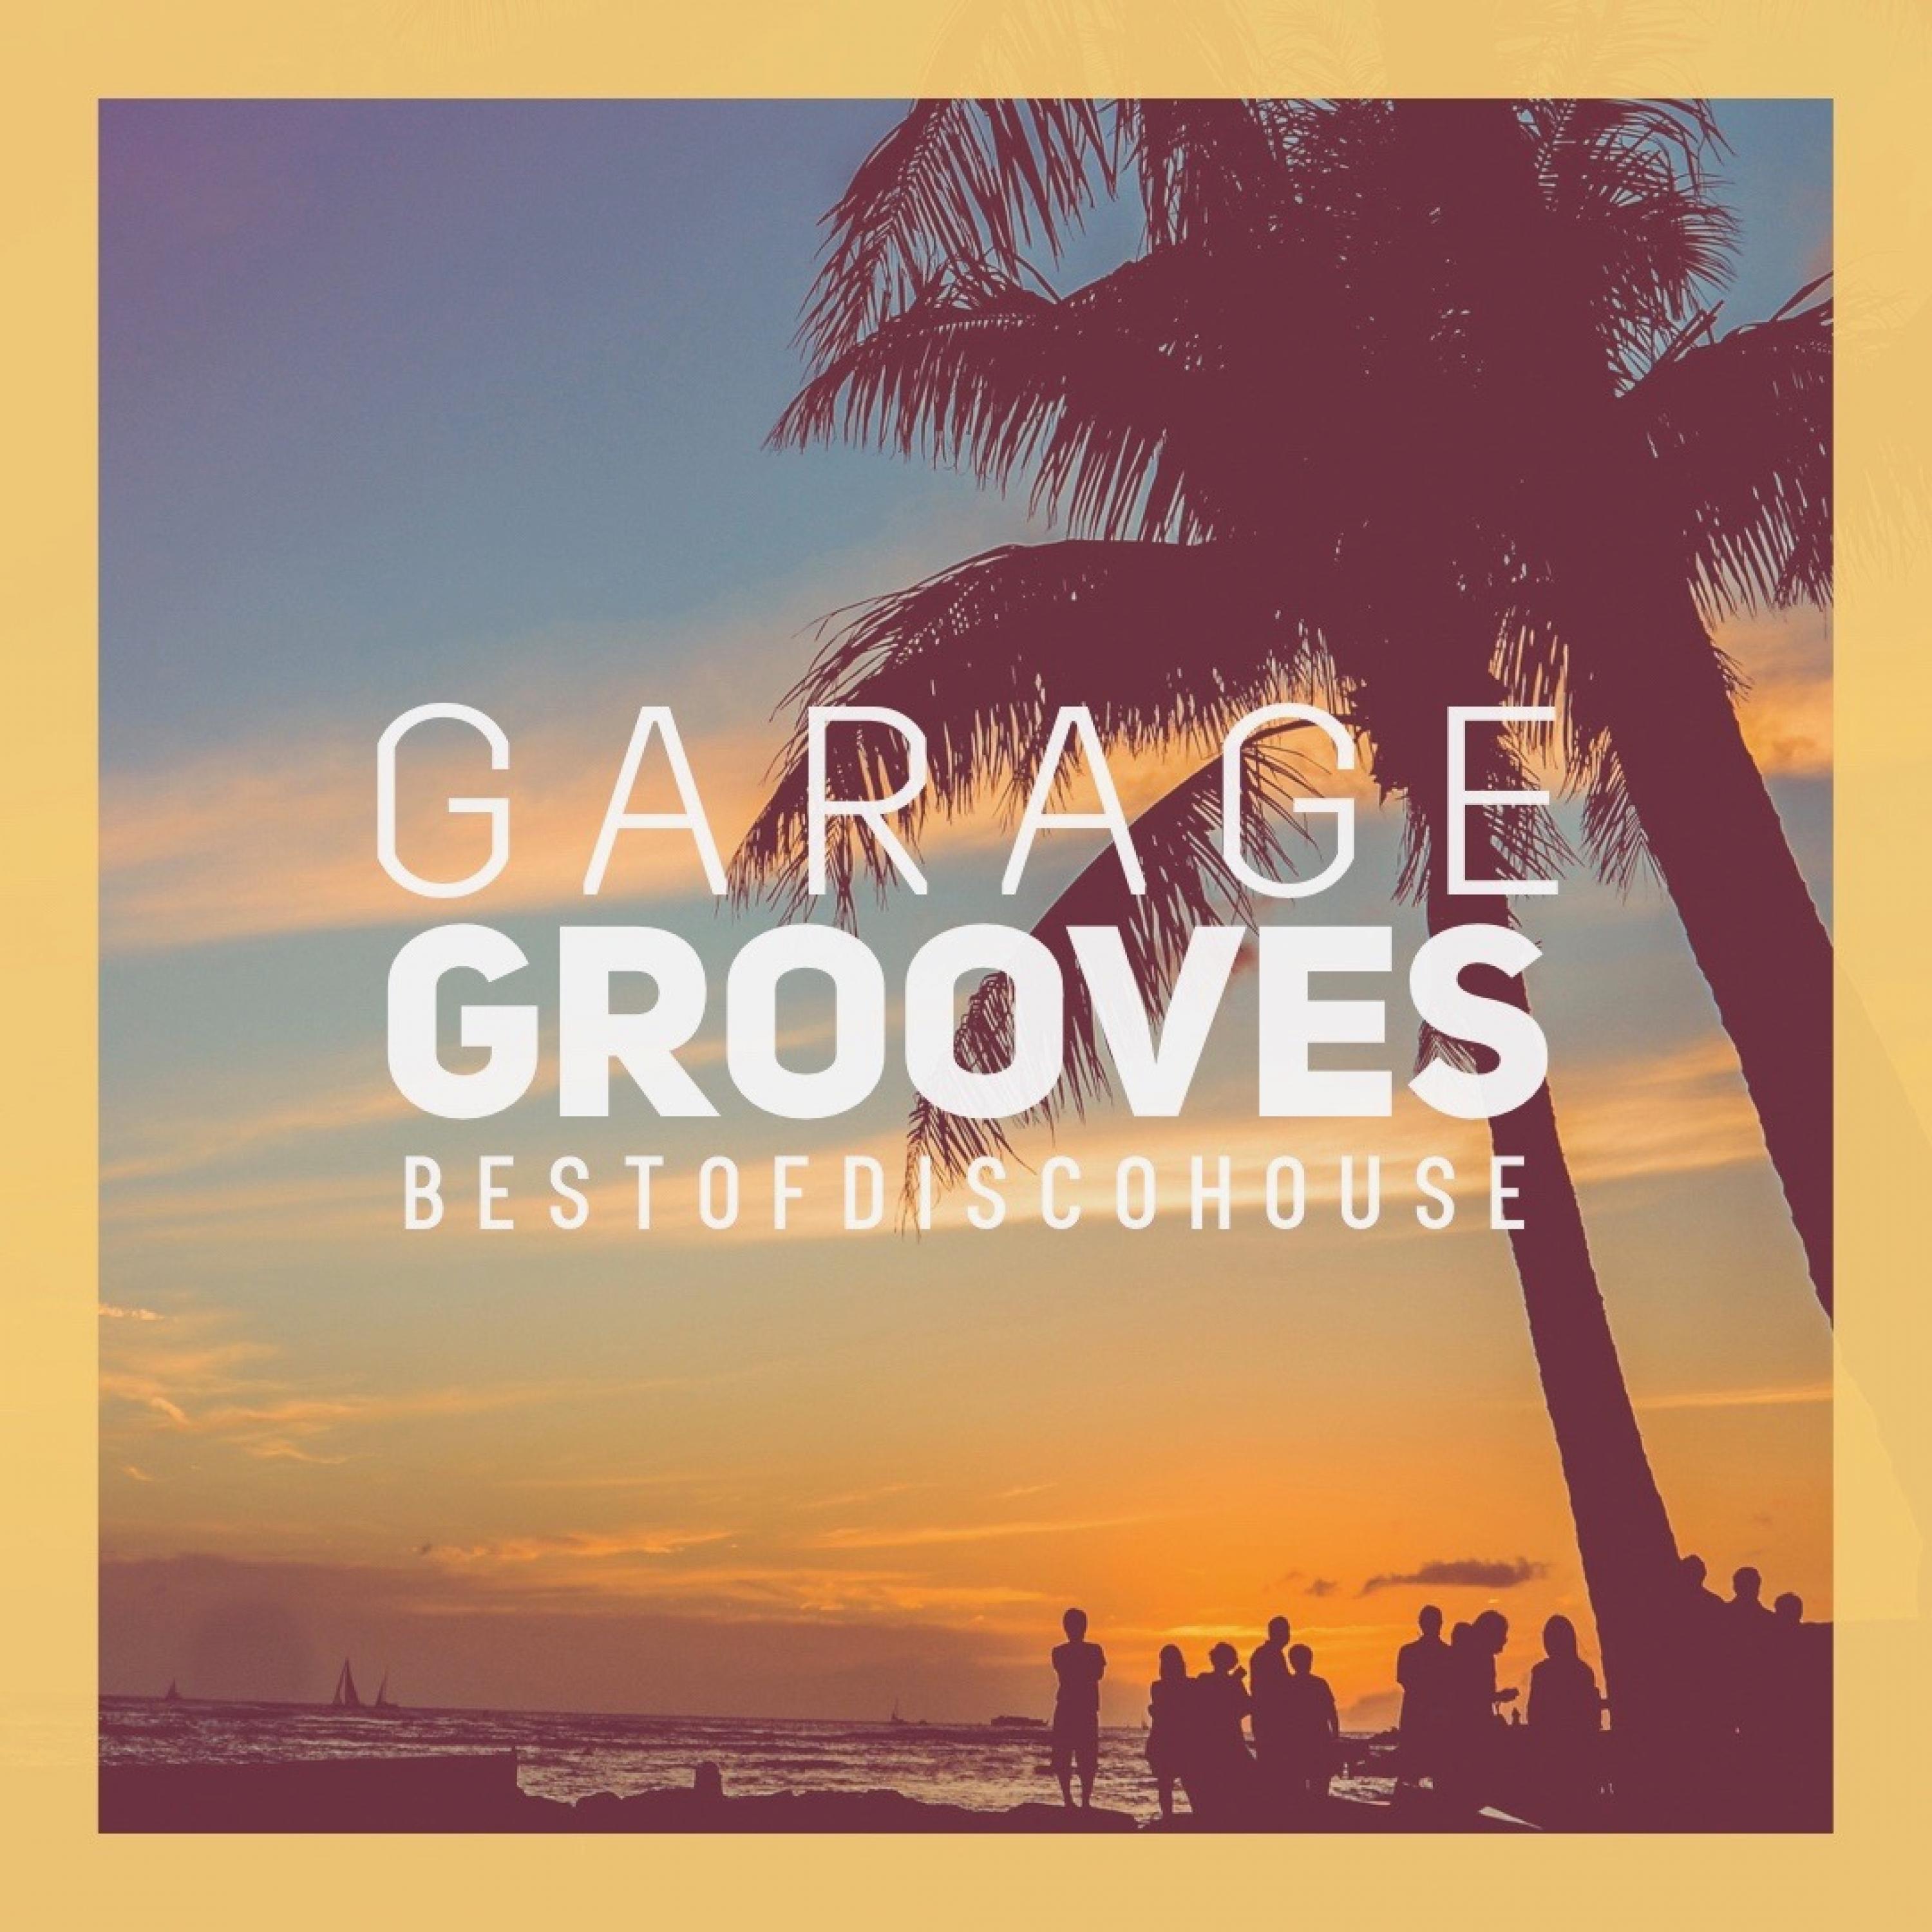 Garage Grooves - Best of Disco House